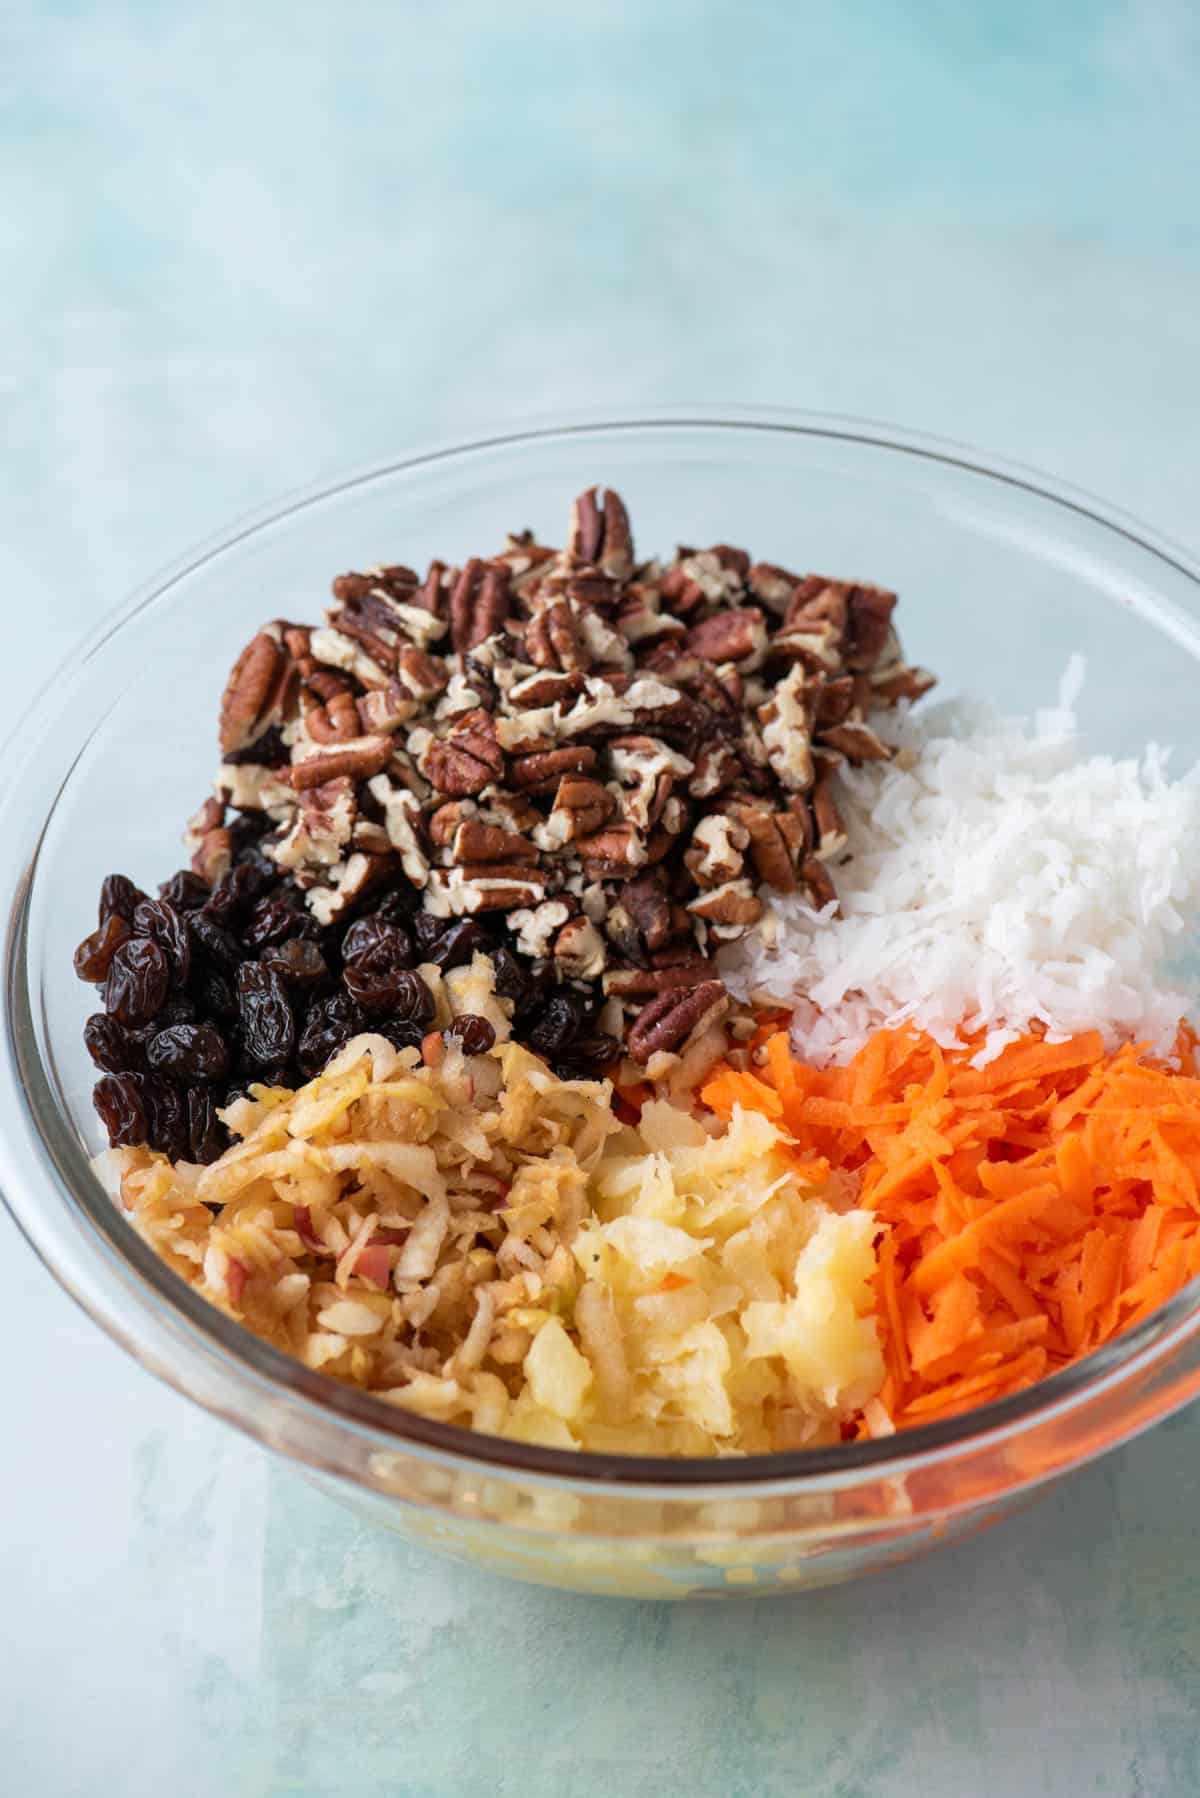 ingredients for morning glory muffins in a glass bowl including raisins, walnuts, shredded apple, crushed pineapple, shredded carrots and shredded coconut